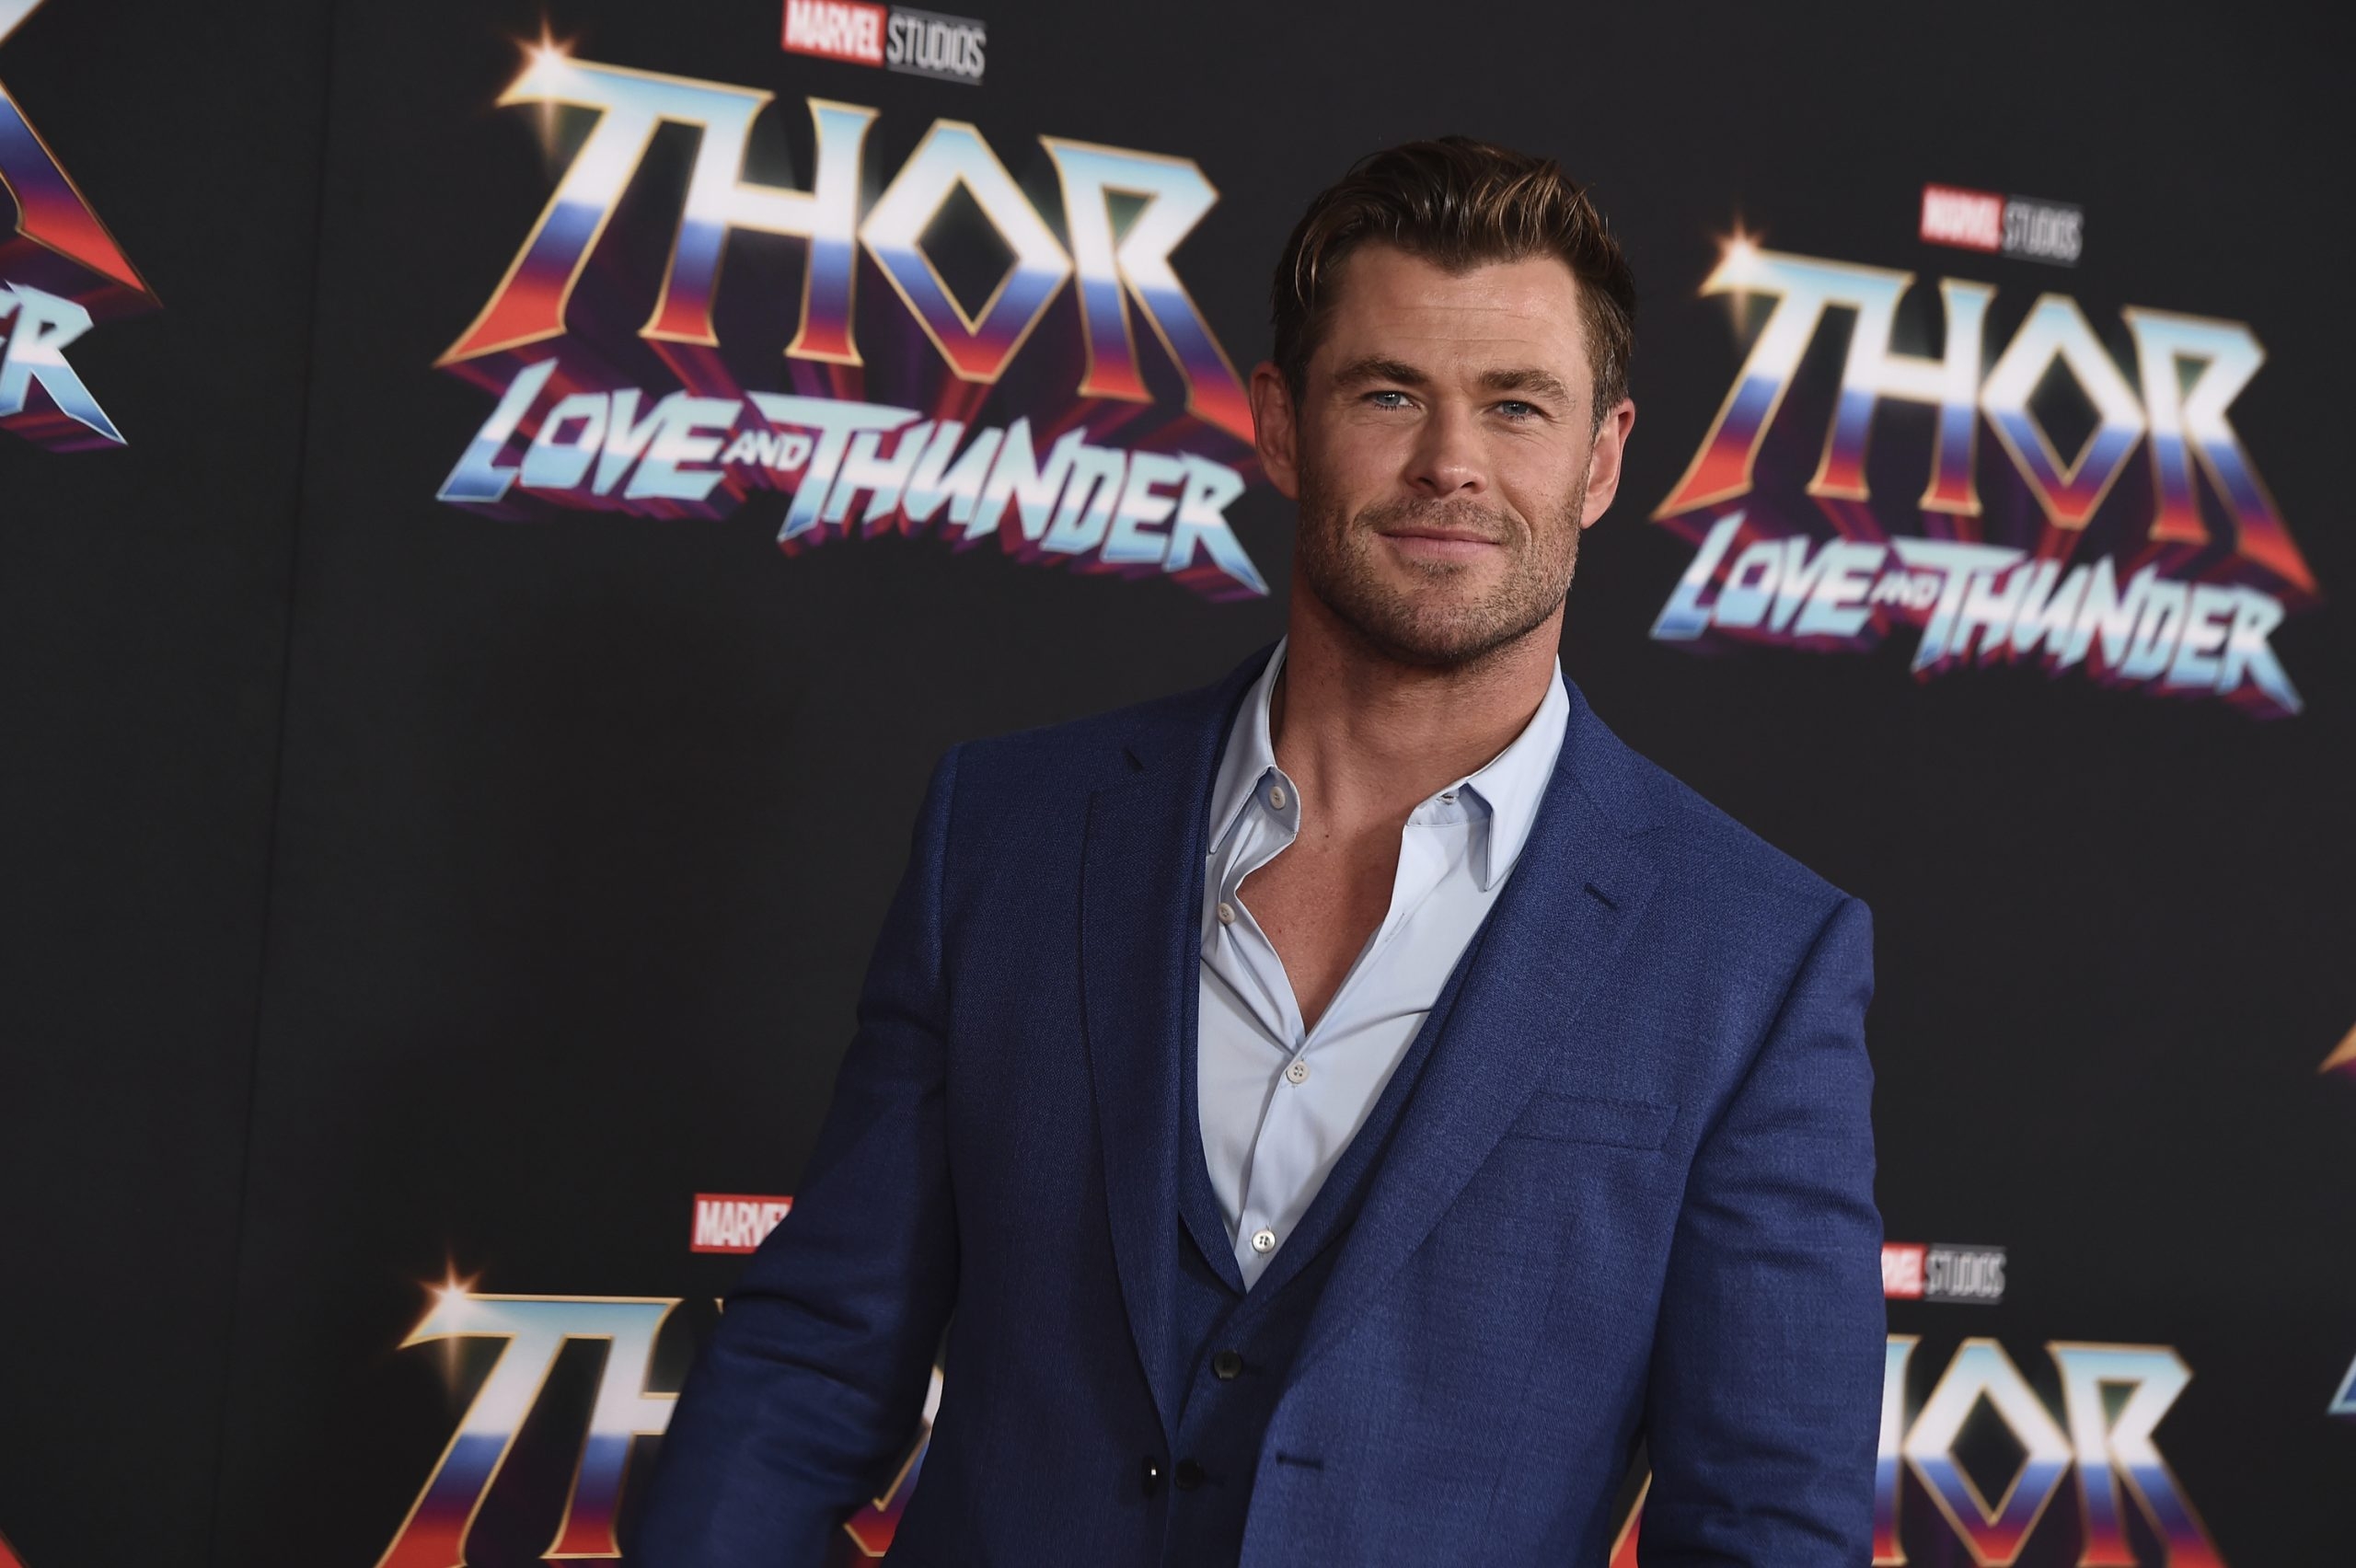 Chris Hemsworth says he’ll play Thor until fans tell him to quit